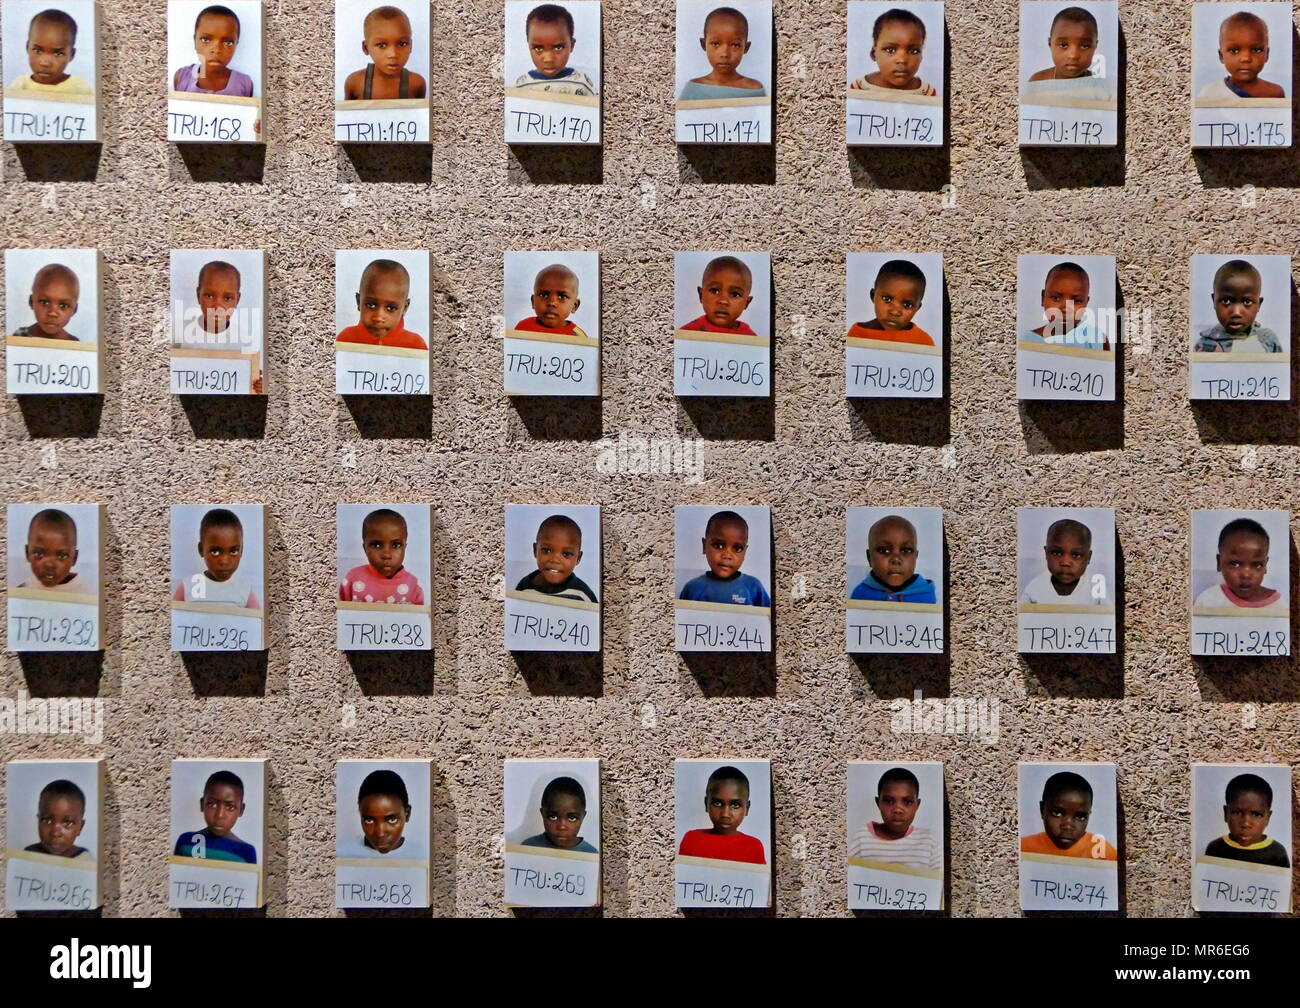 photograph of children separated from their families during the 1994 Rwanda Genocide. This was a genocidal mass slaughter, of Tutsi tribal people, in Rwanda, by members of the Hutu majority. An estimated 500,000–1,000,000 Rwandans were killed during the 100-day period from April 7 to mid-July 1994. Stock Photo